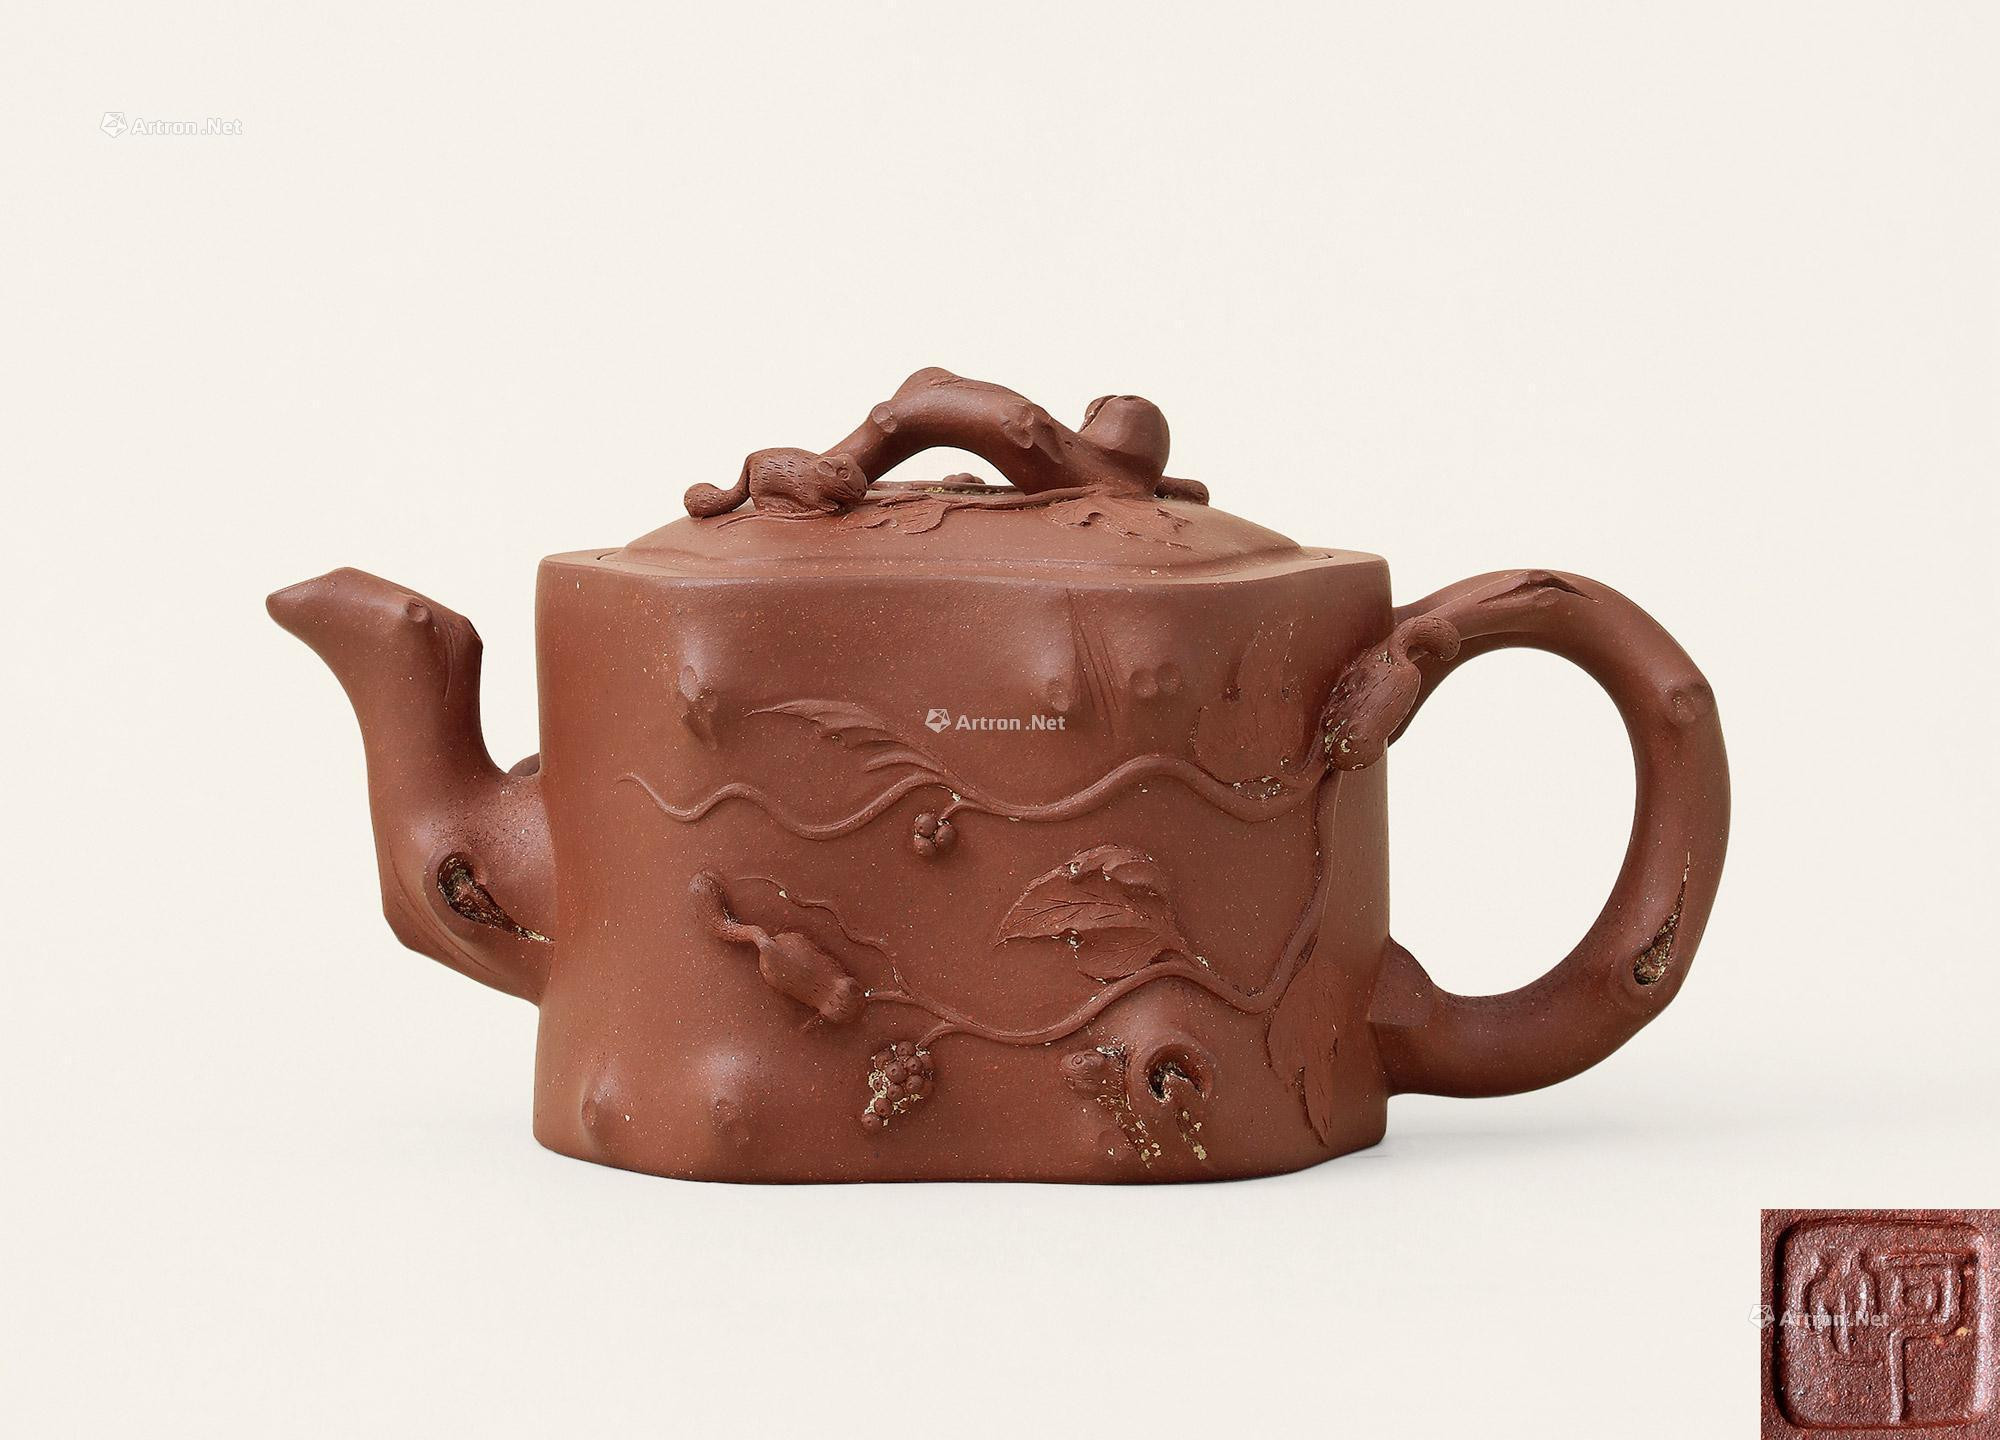 TEAPOT WITH THE DECORATION OF SQUIRRELS AND GRAPES